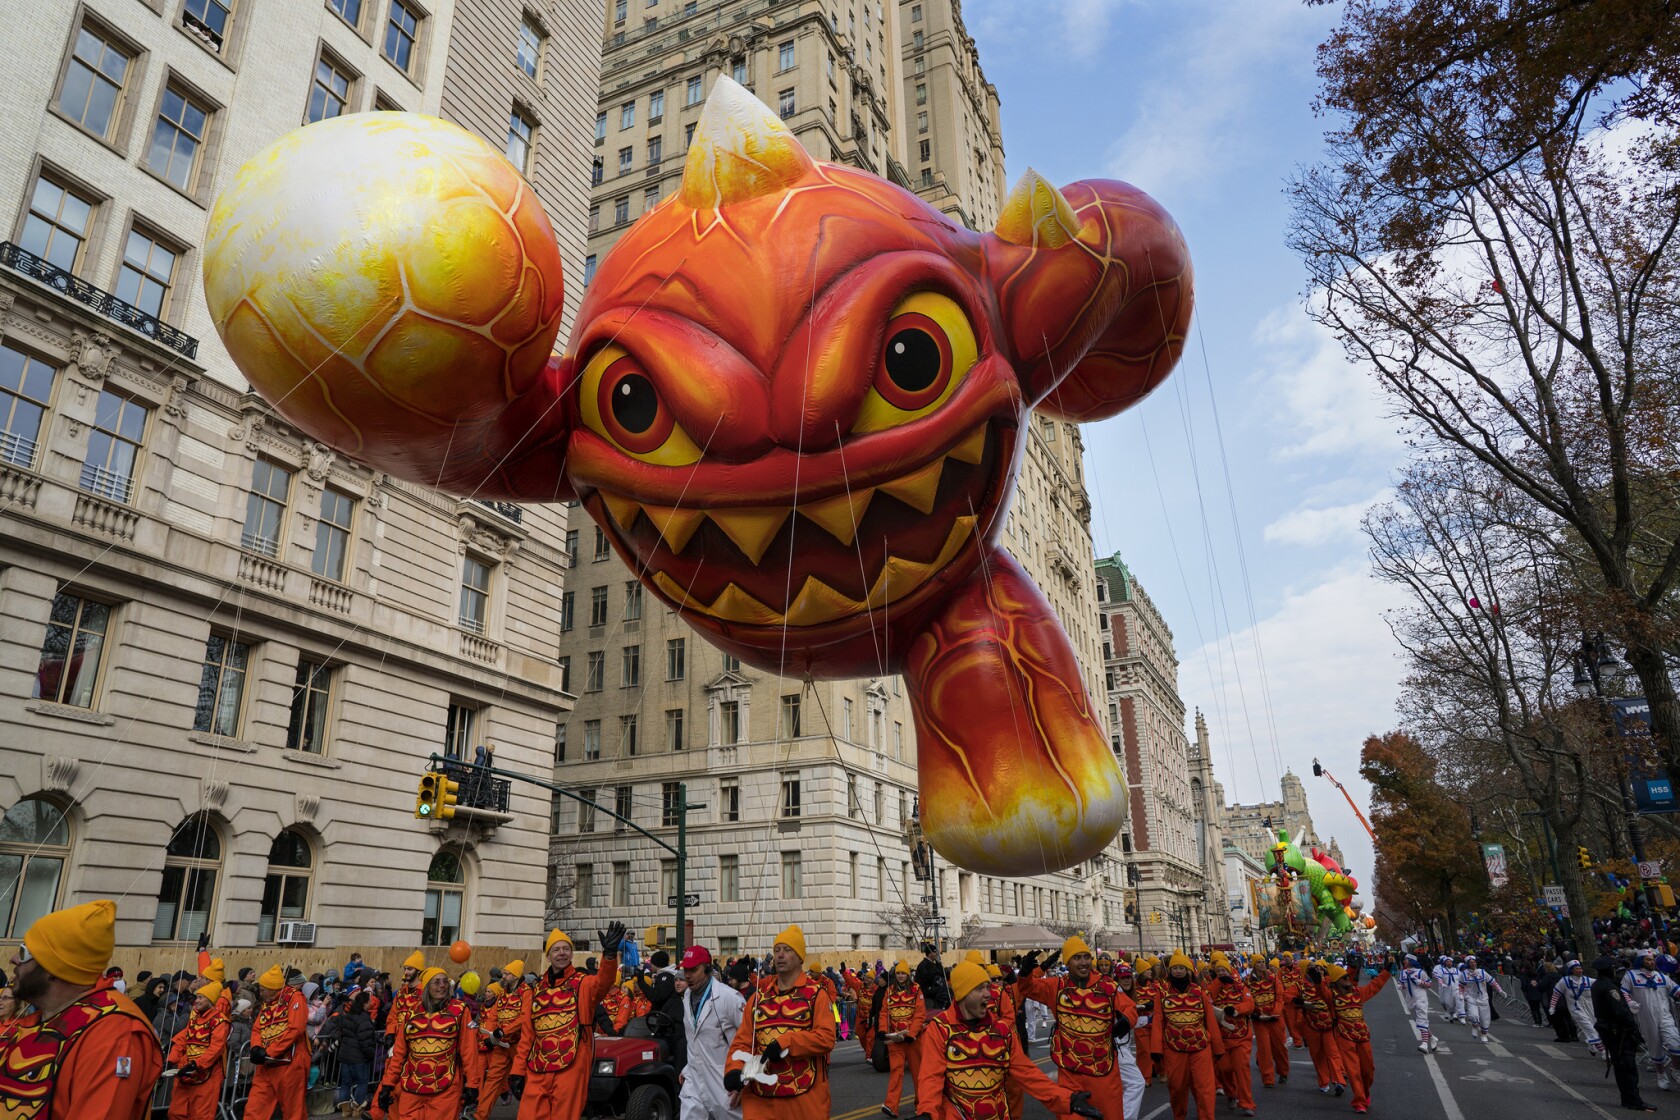 Macy's Thanksgiving Day Parade goes off without a hitch amid tight